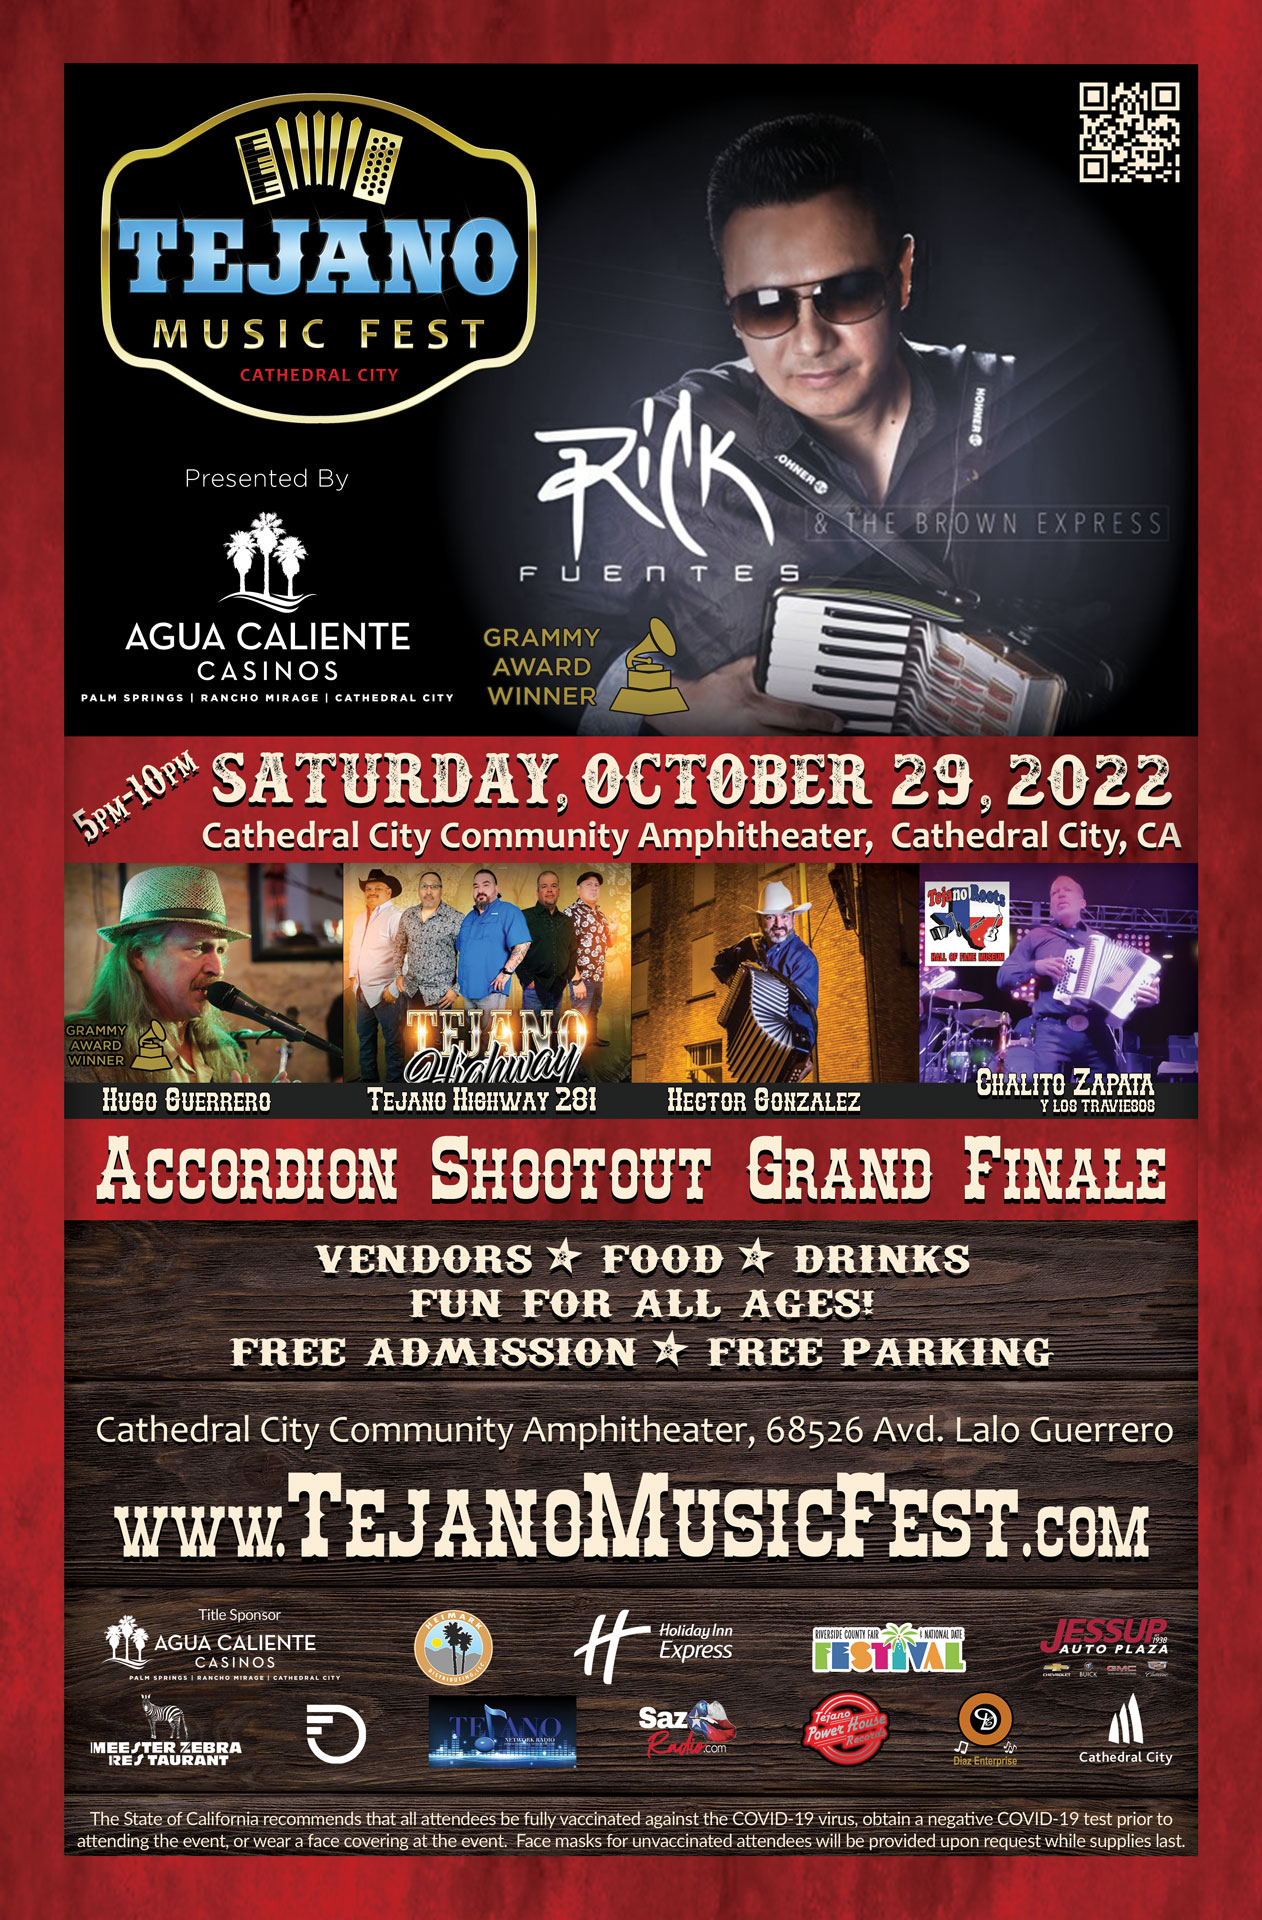 4th Annual Tejano Music Festival Brings Fall Excitement to Cathedral City Amphitheater, Oct. 29, 2022